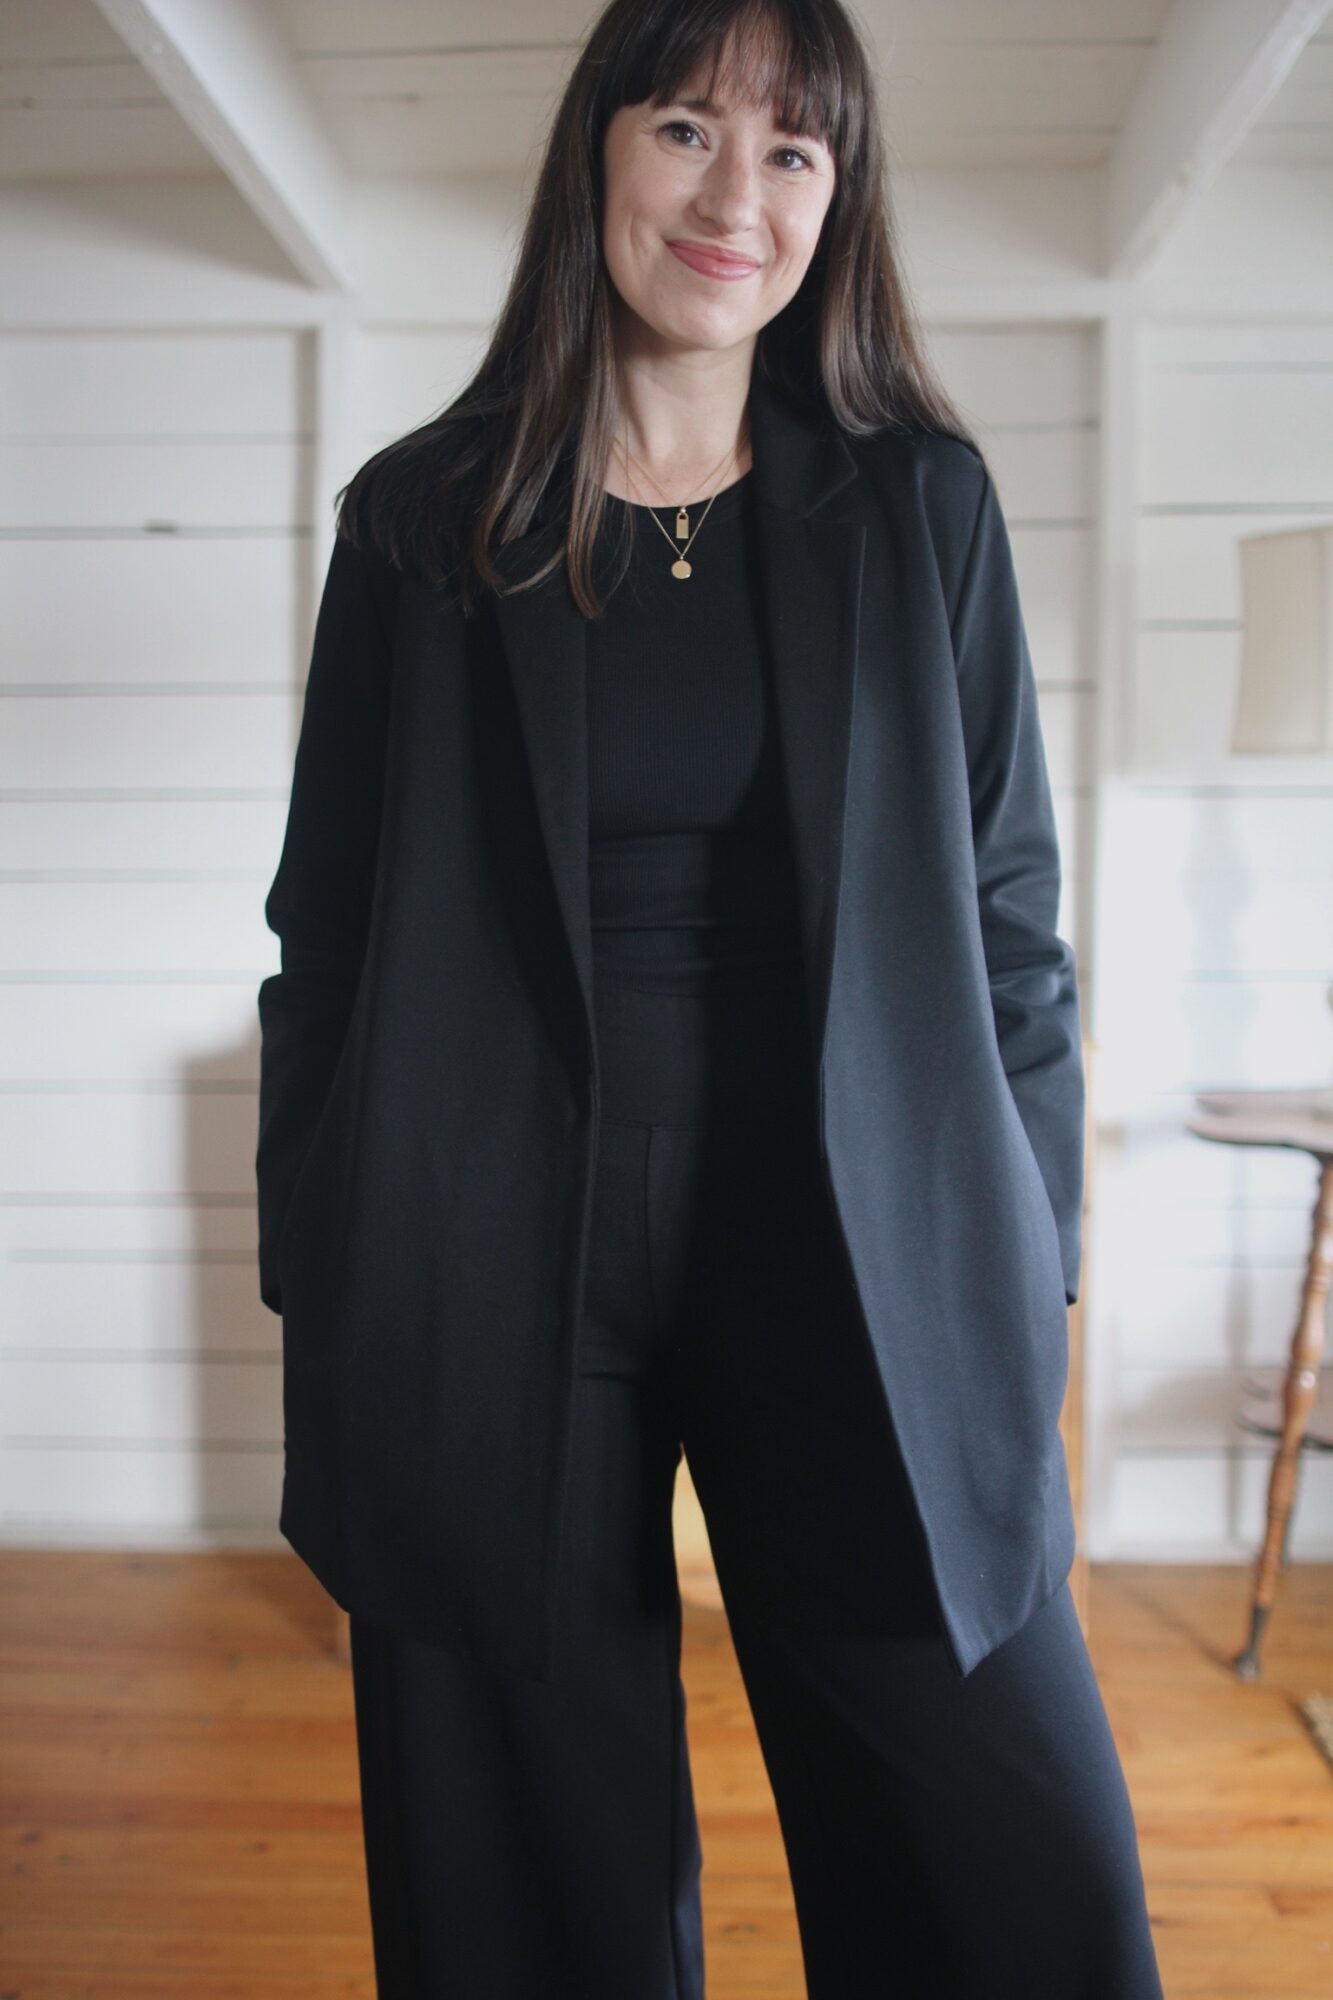 How to Style a Black Coat  Black coat outfit, Winter coat outfits, Black  dress coat